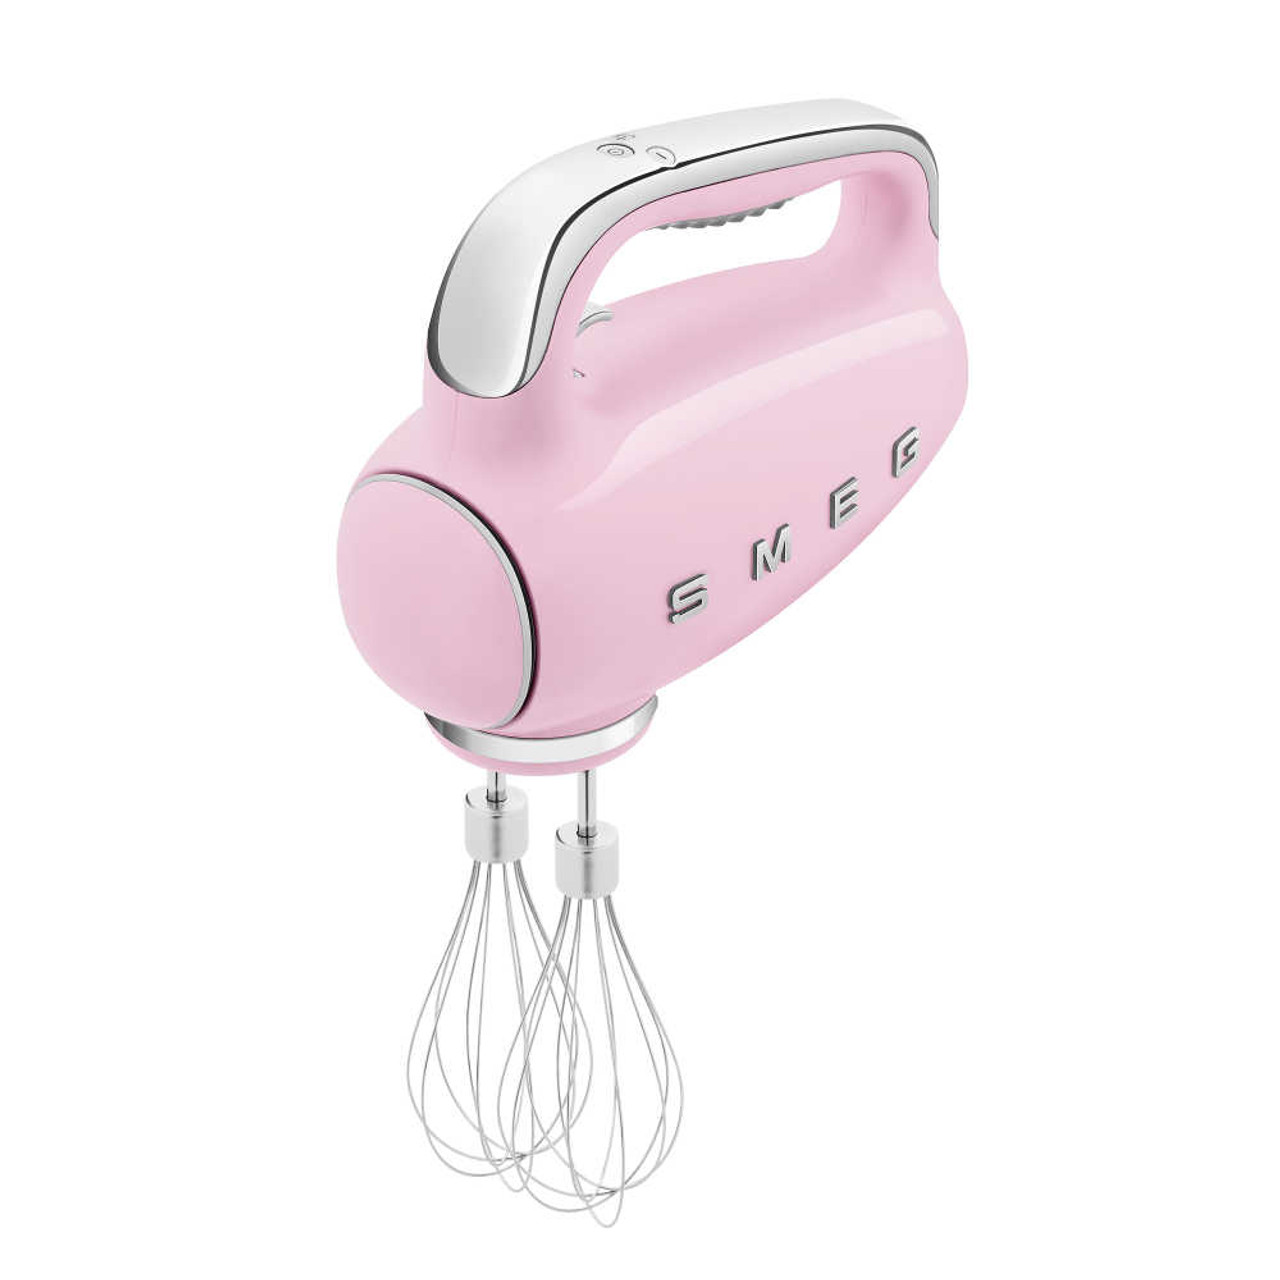 SMEG Hand Mixer and Accessories - Allred Collaborative